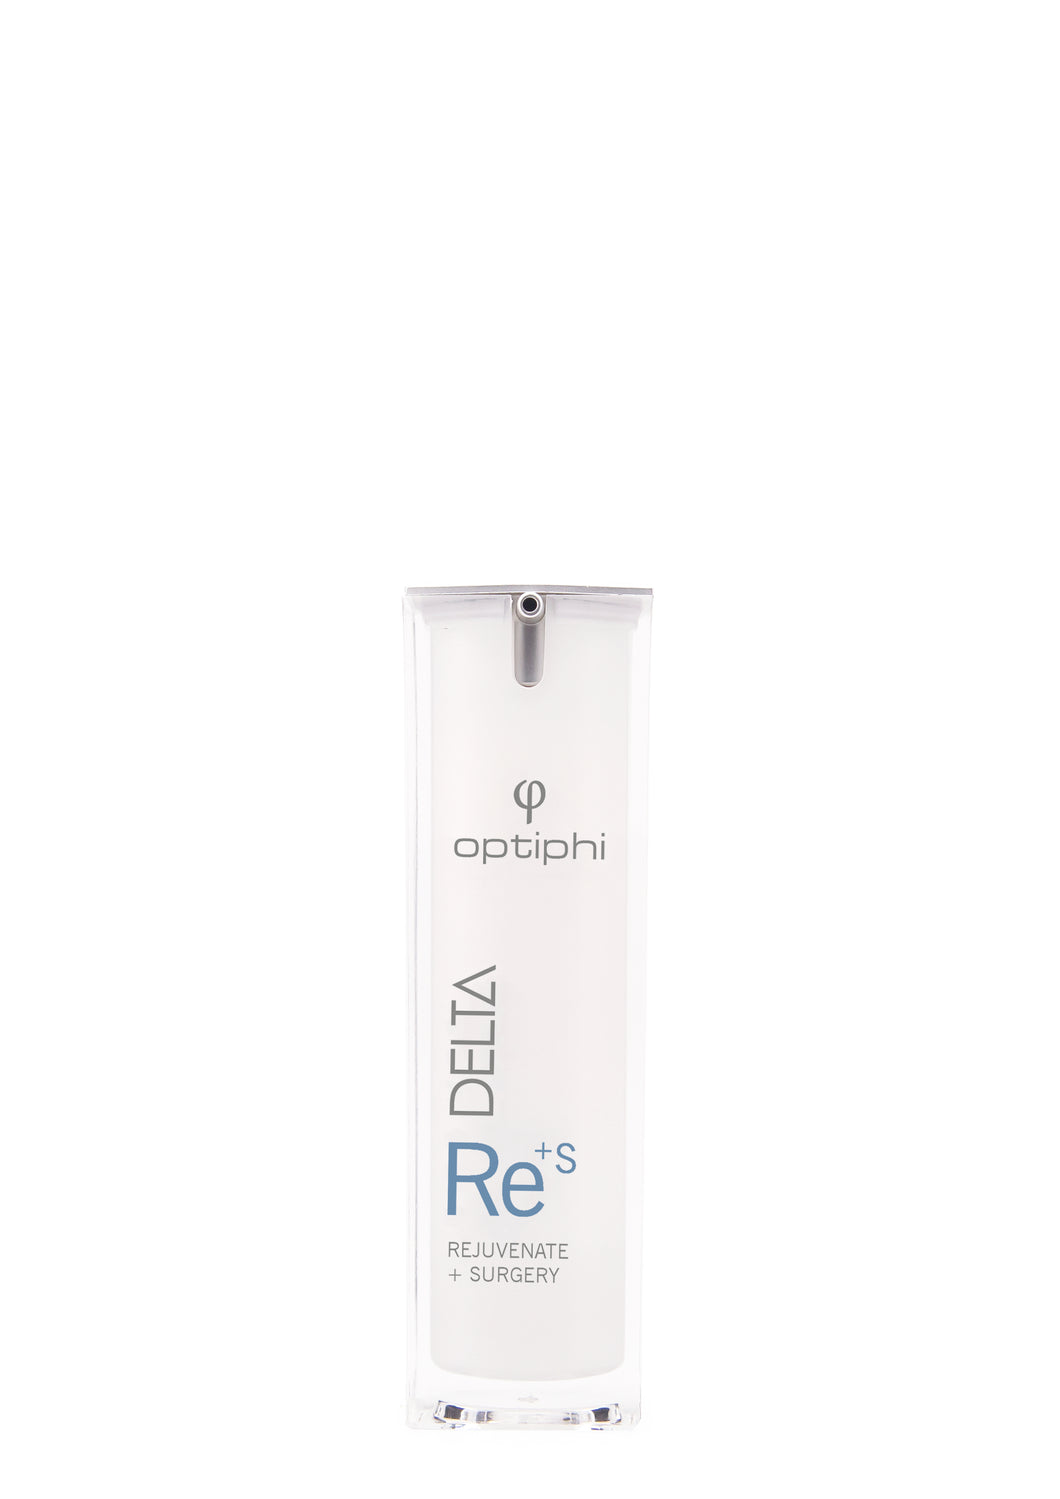 Designed as a partner for surgical interventions and invasive treatments, this rejuvenating serum boasts 15 active ingredients formulated together to rejuvenate the skin. 